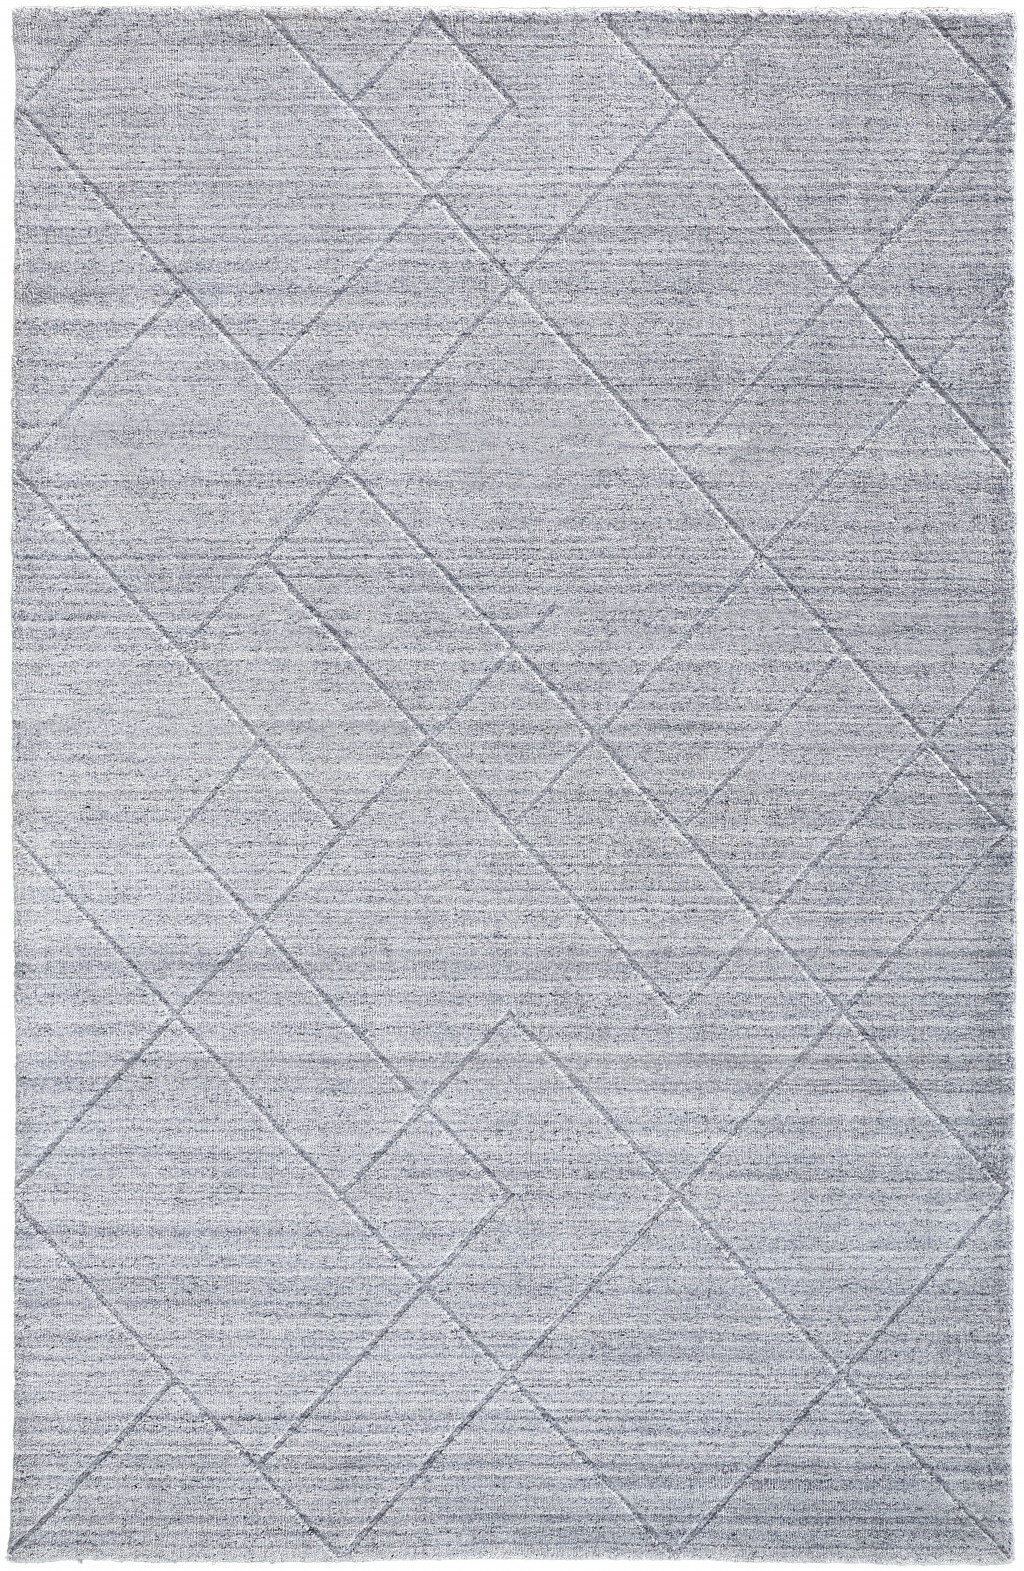 5' X 8' Gray And Silver Striped Hand Woven Area Rug-514792-1